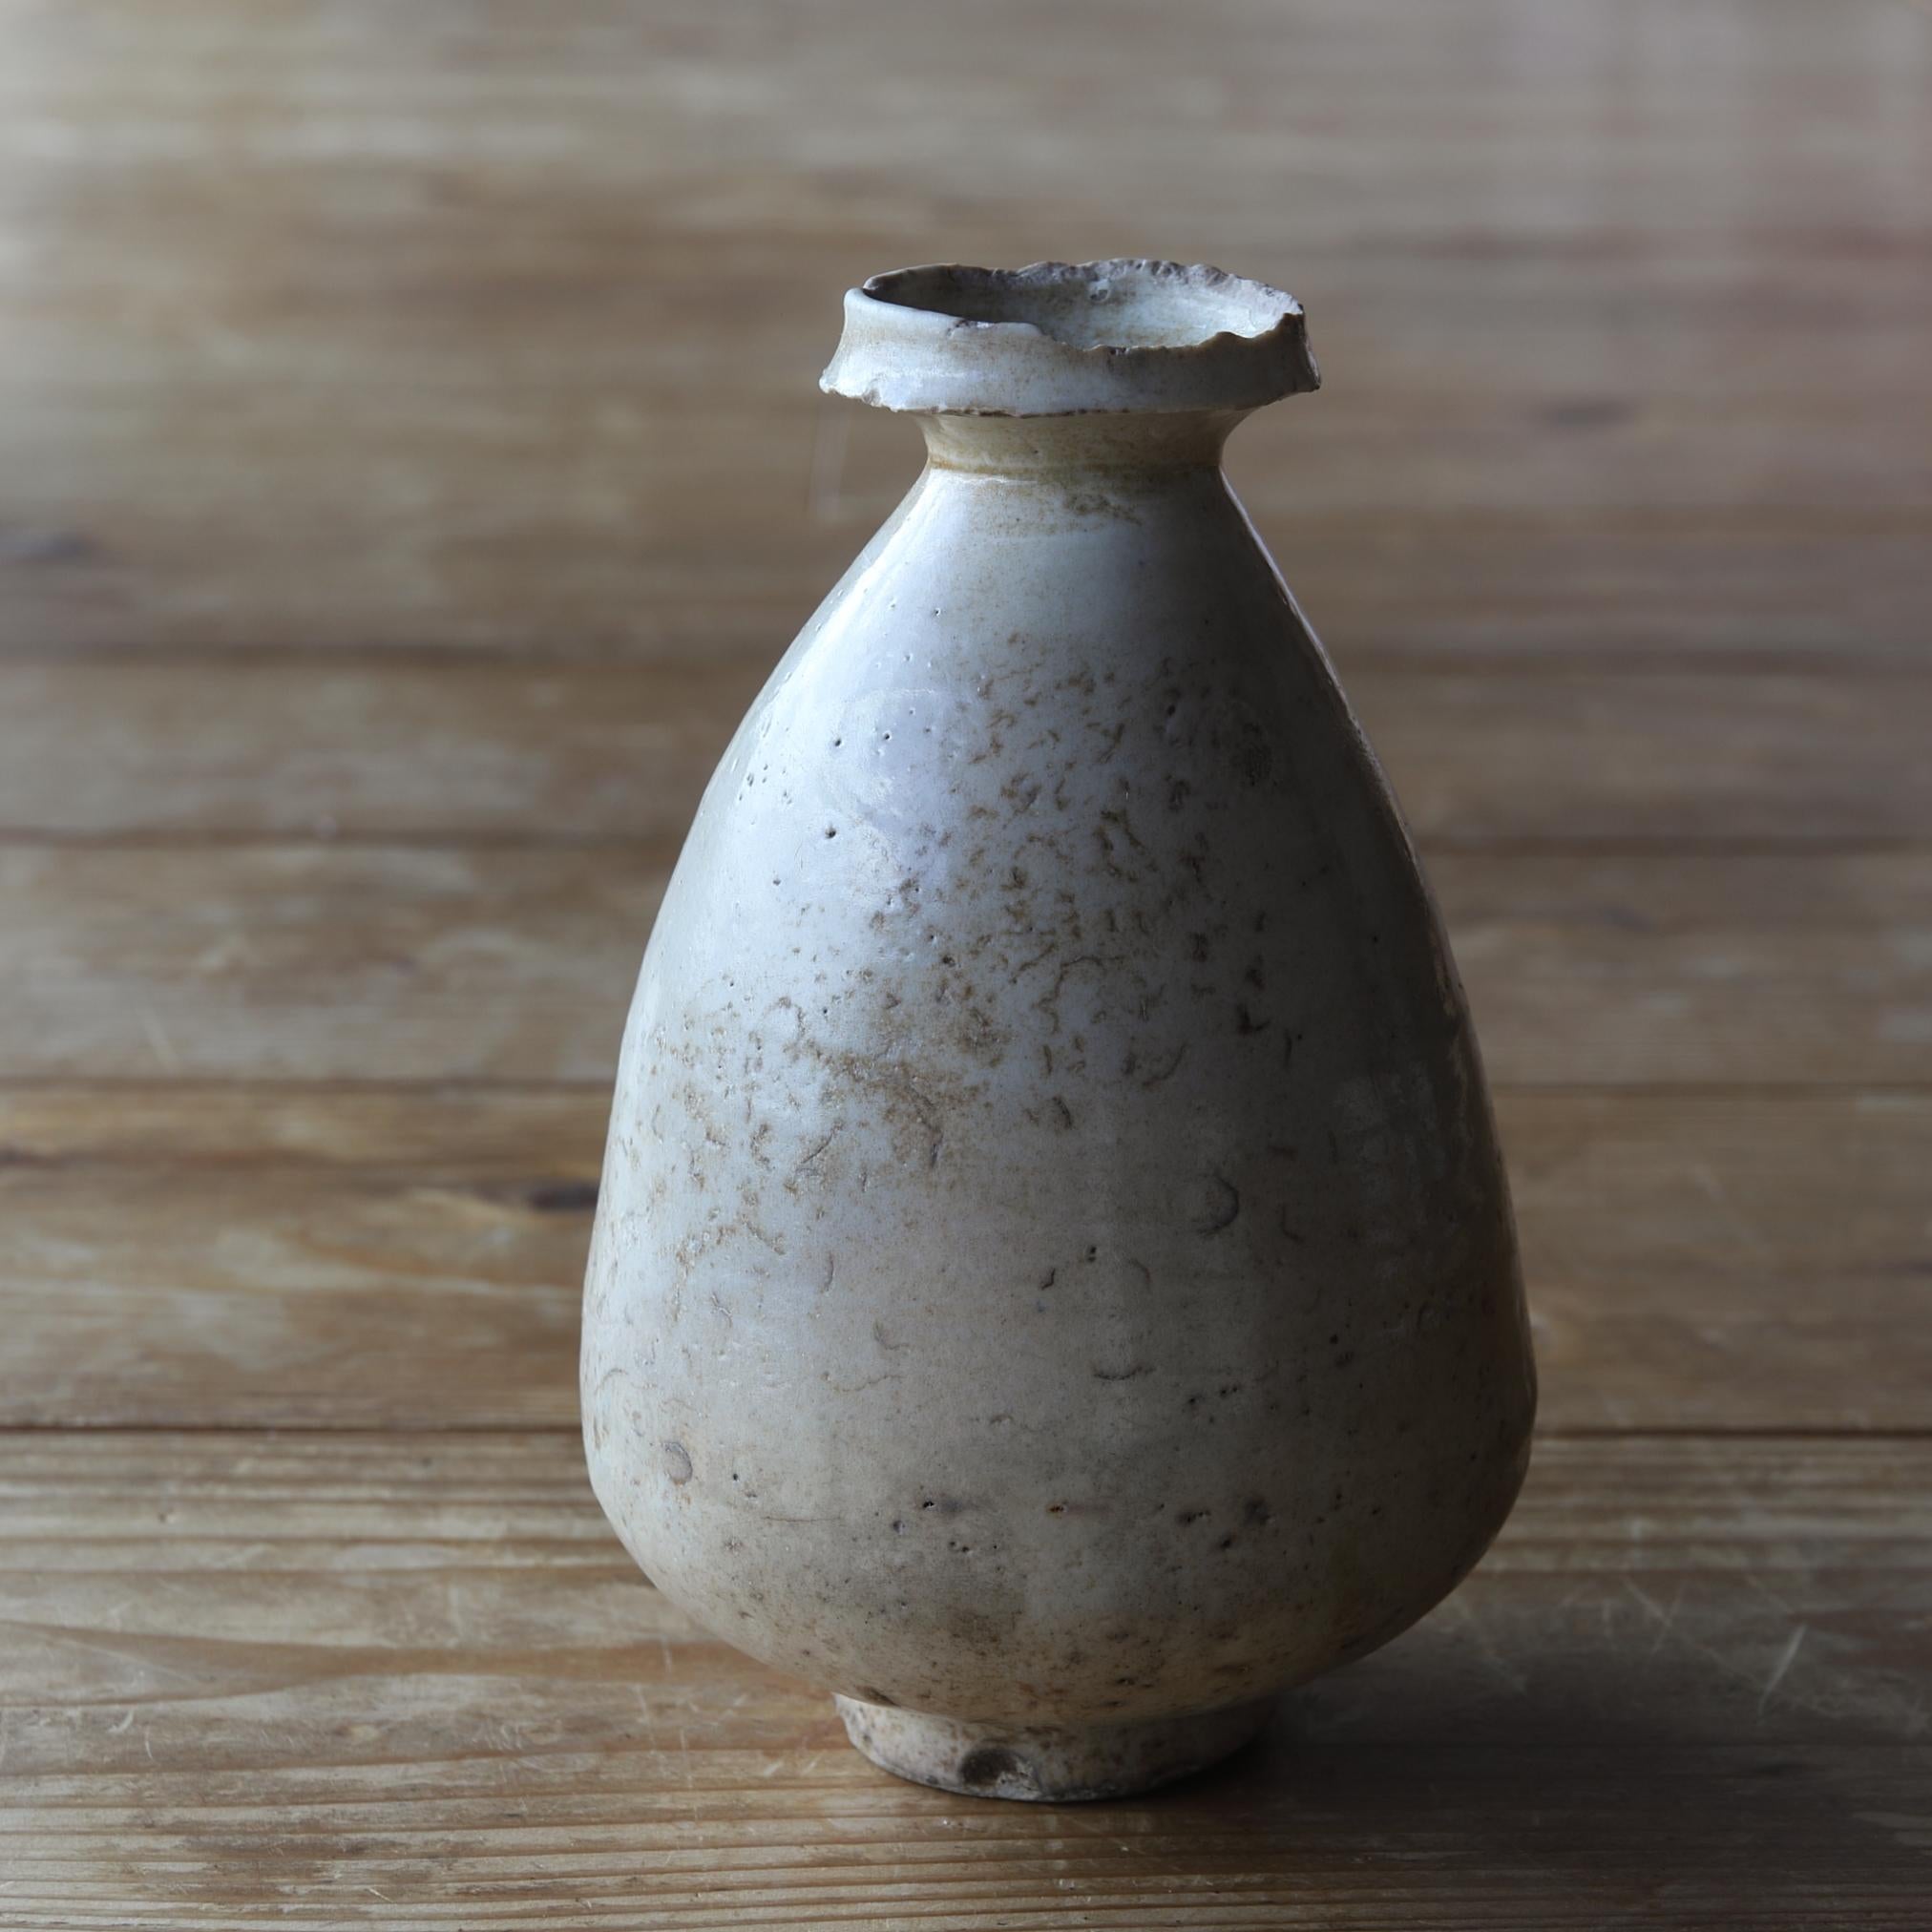 White Porcelain Vase / 17th Century / Korean Antiques / Joseon Dynasty In Fair Condition For Sale In Kyoto-shi, Kyoto